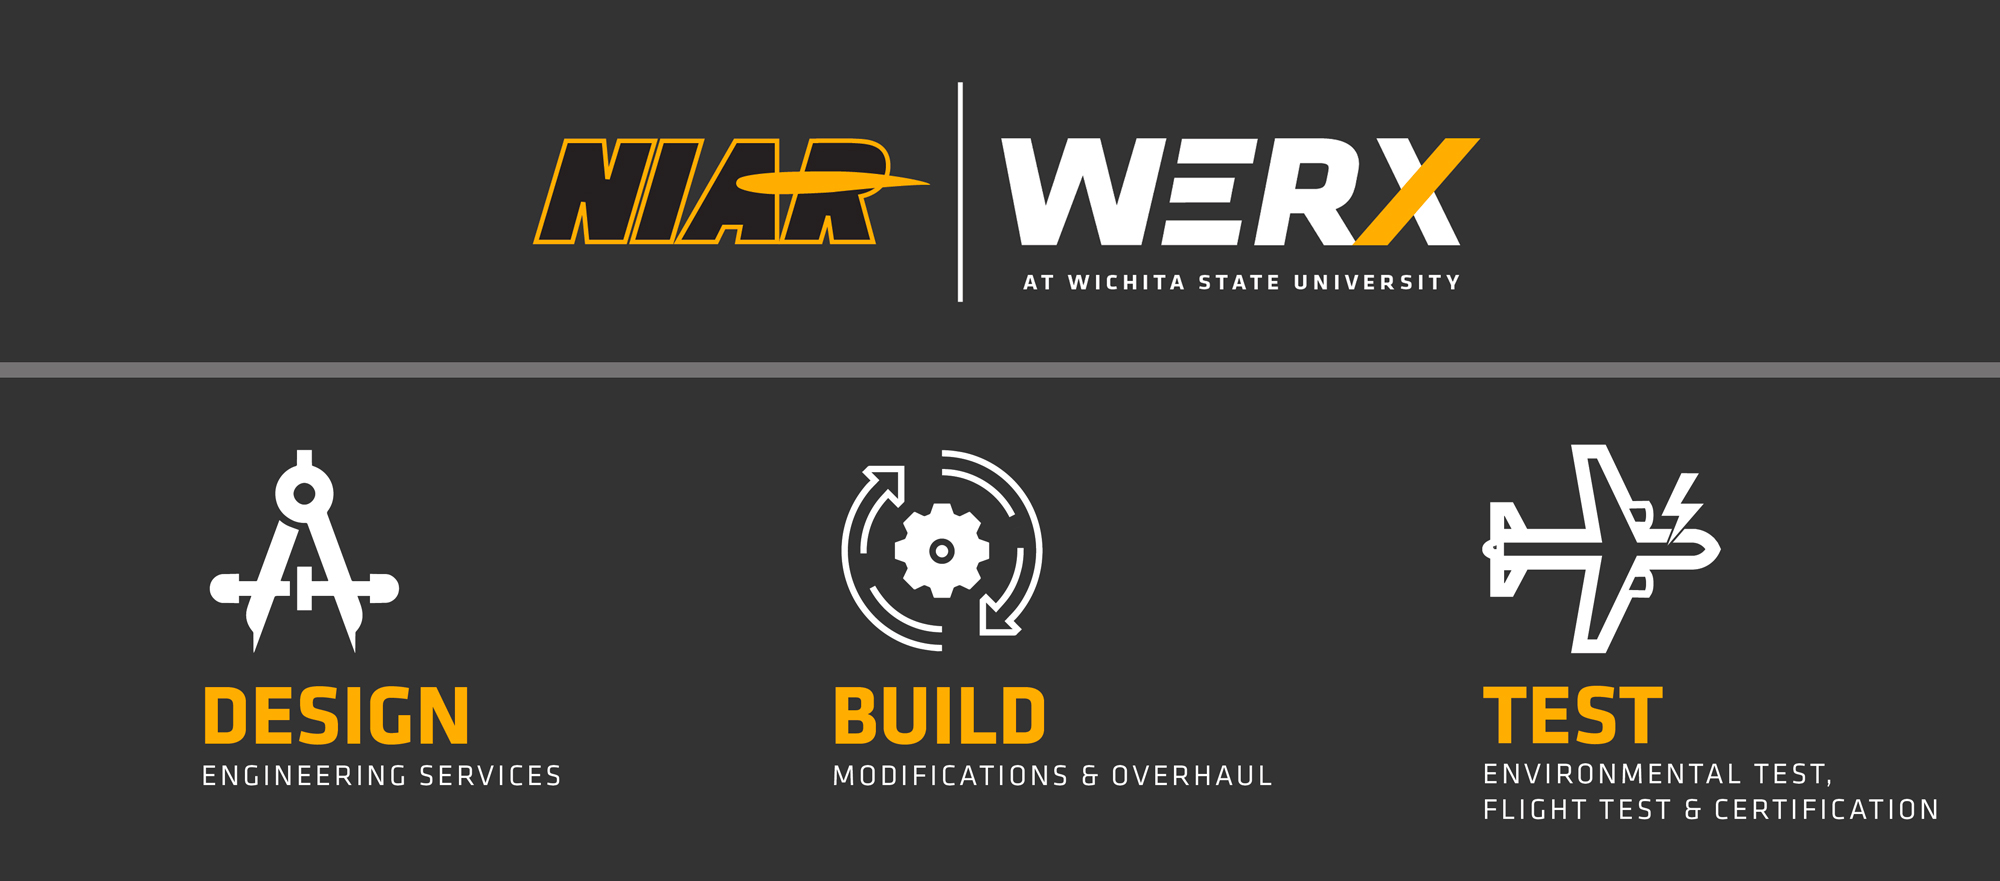 NIAR WERX LOGO - Design (Engineering Services), Build (Modifications and Overhaul), Test (Environmental Test, Flight Test and Certification)